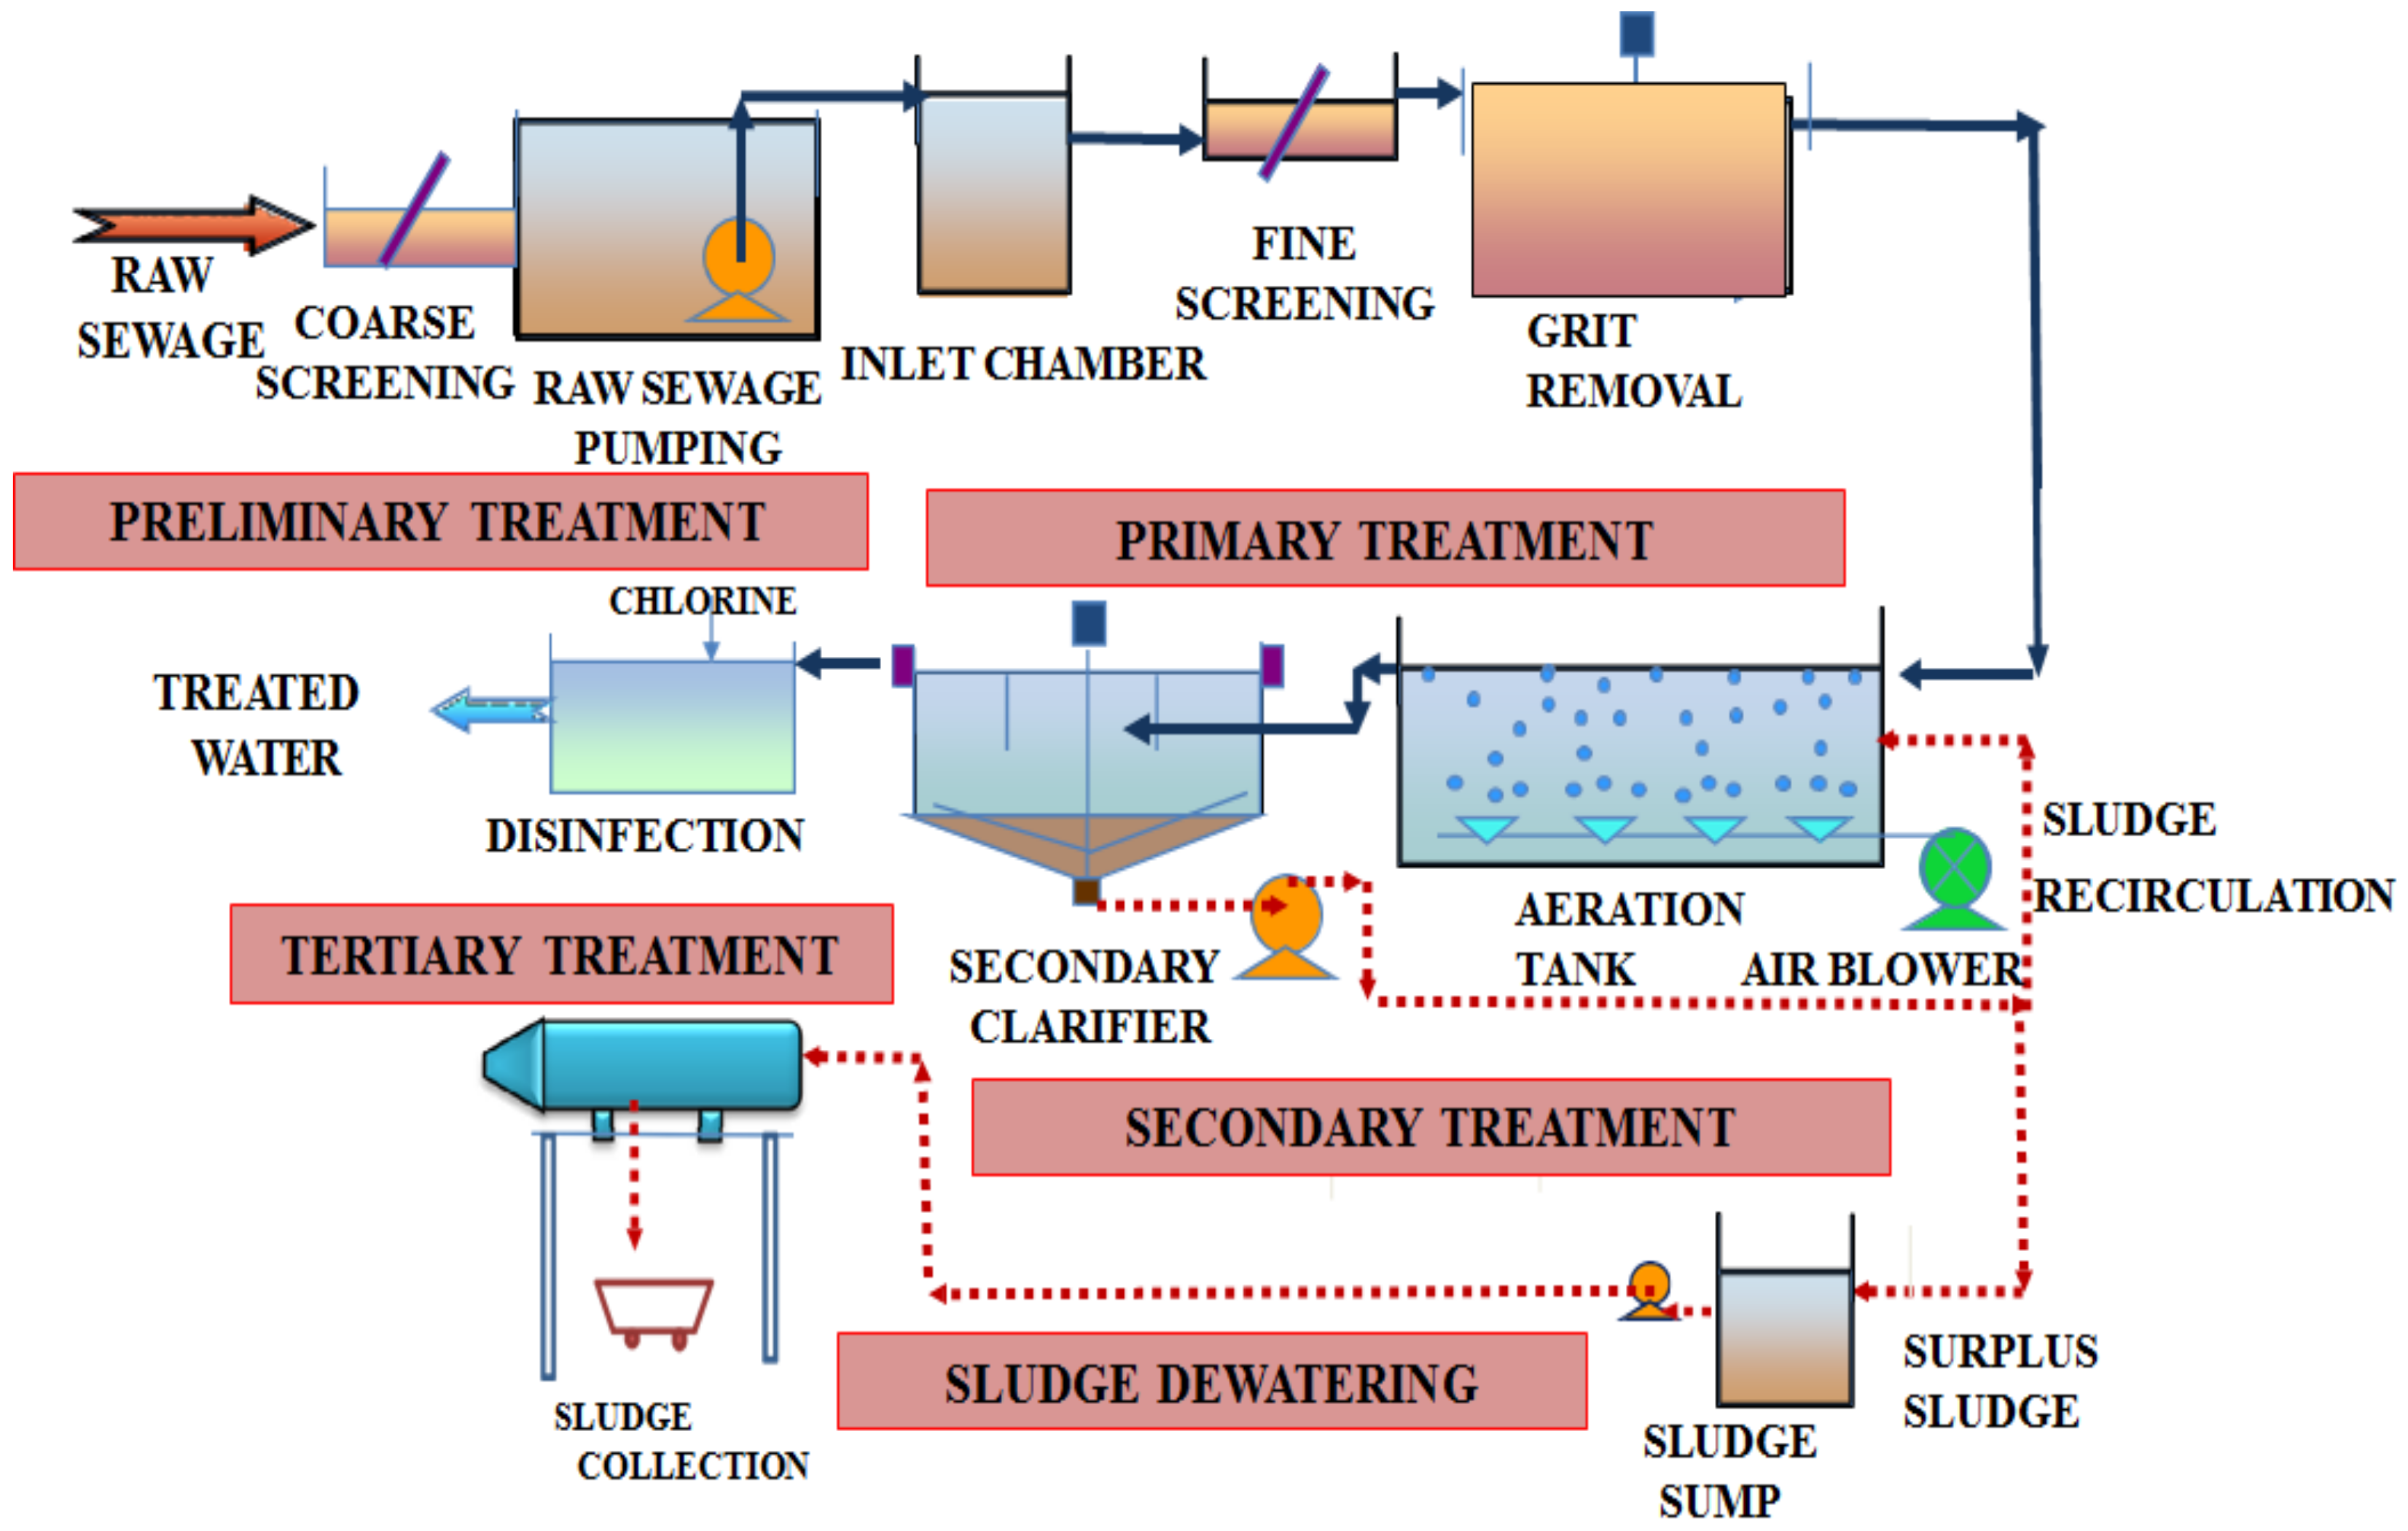 Chemosensors Free Full Text Review Of Fiber Optical Sensors And Its Importance In Sewer Corrosion Factor Analysis Html